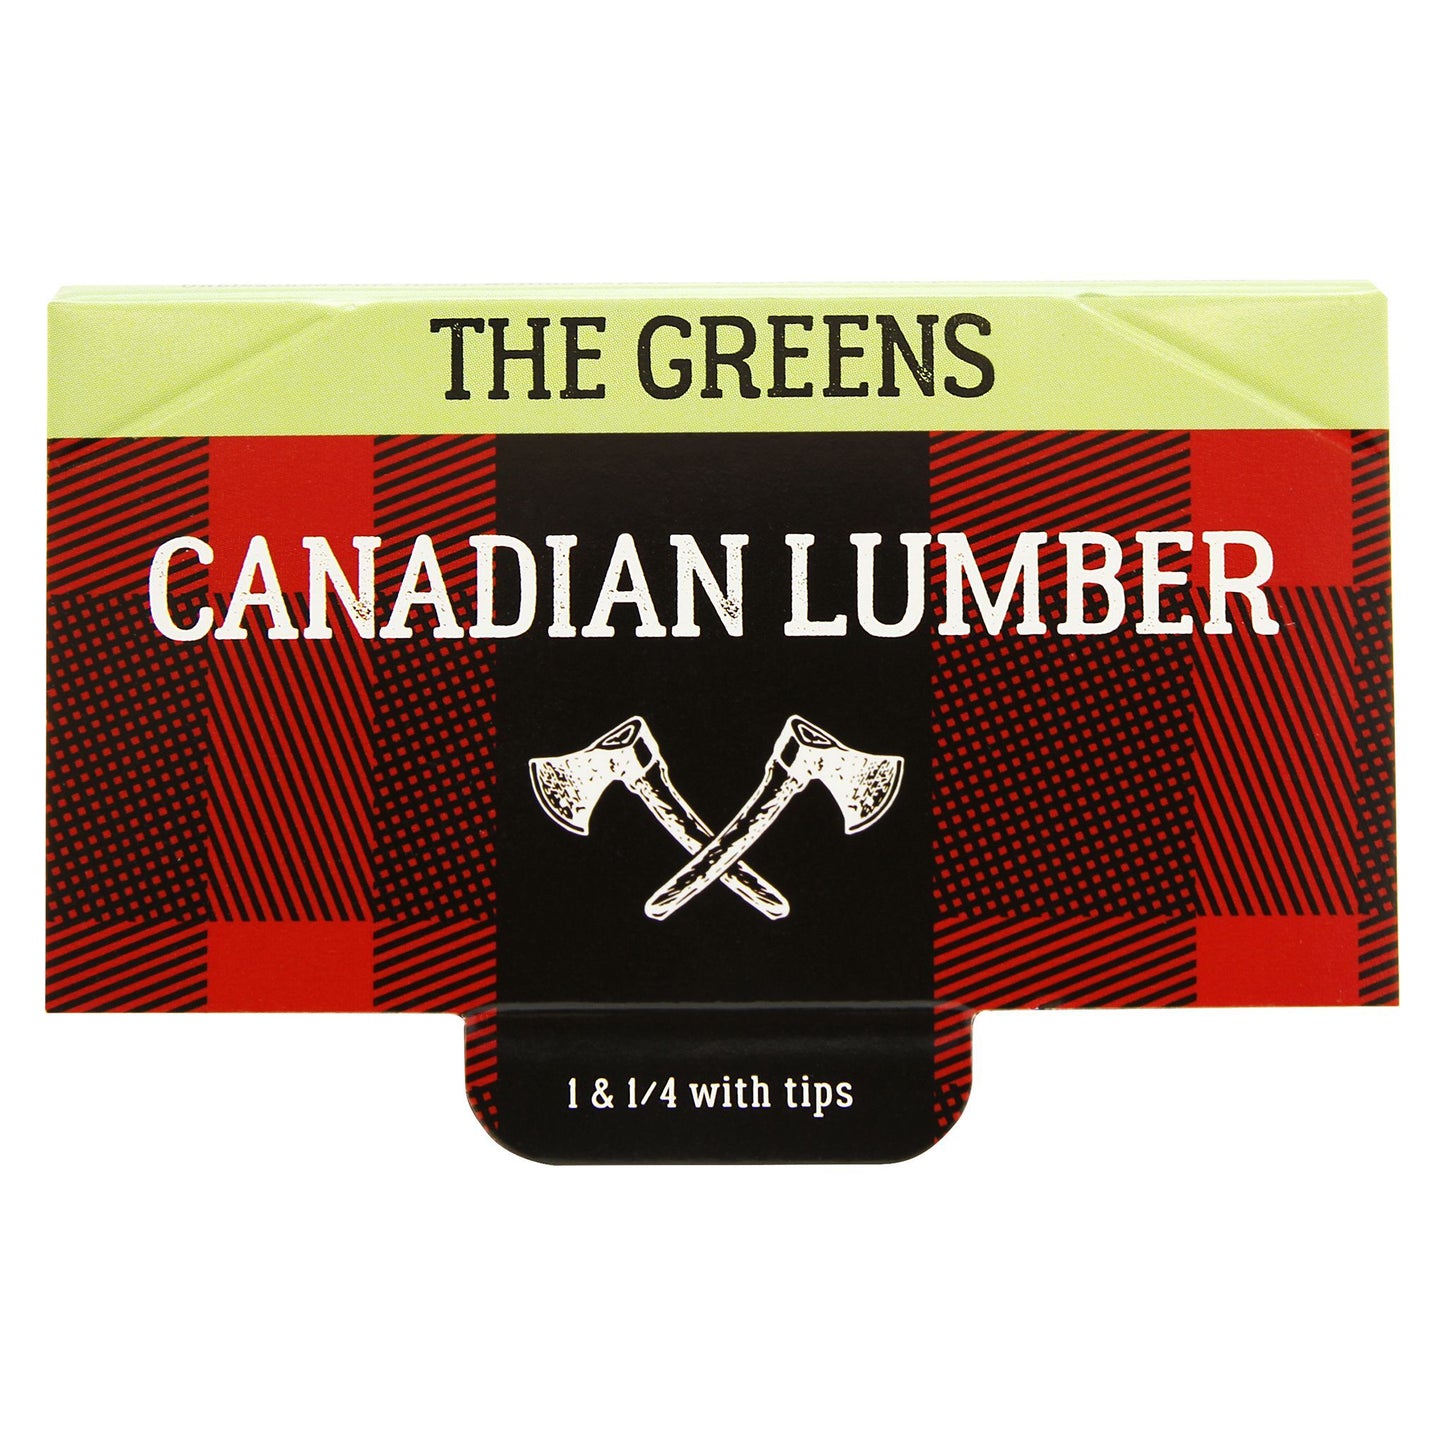 Canadian Lumber - Greens Unbleached Hemp Rolling Papers with Tips